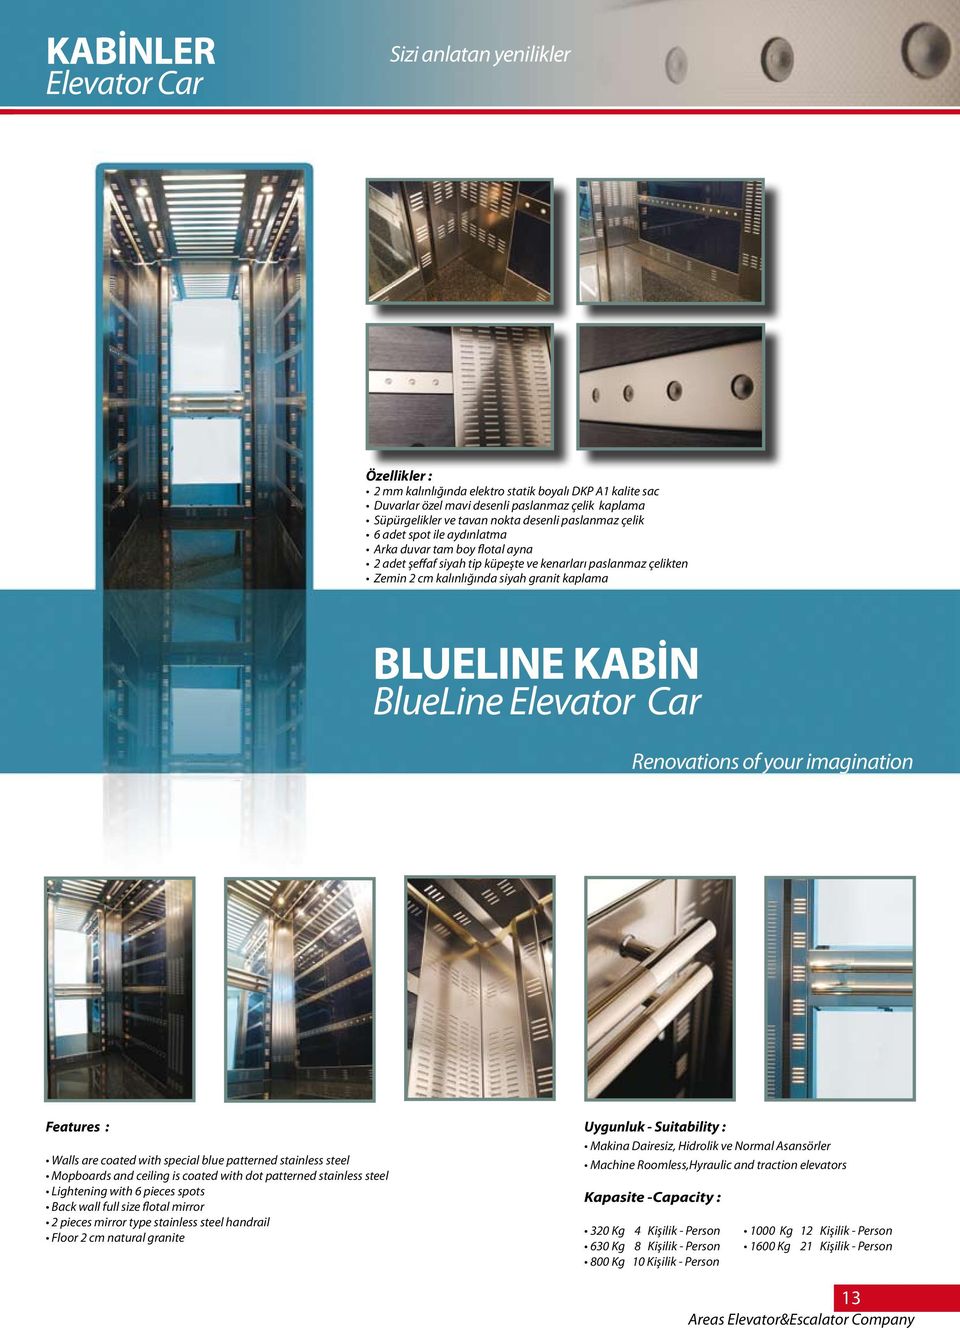 KABİN BlueLine Elevator Car Renovations of your imagination Features : Walls are coated with special blue patterned stainless steel Mopboards and ceiling is coated with dot patterned stainless steel